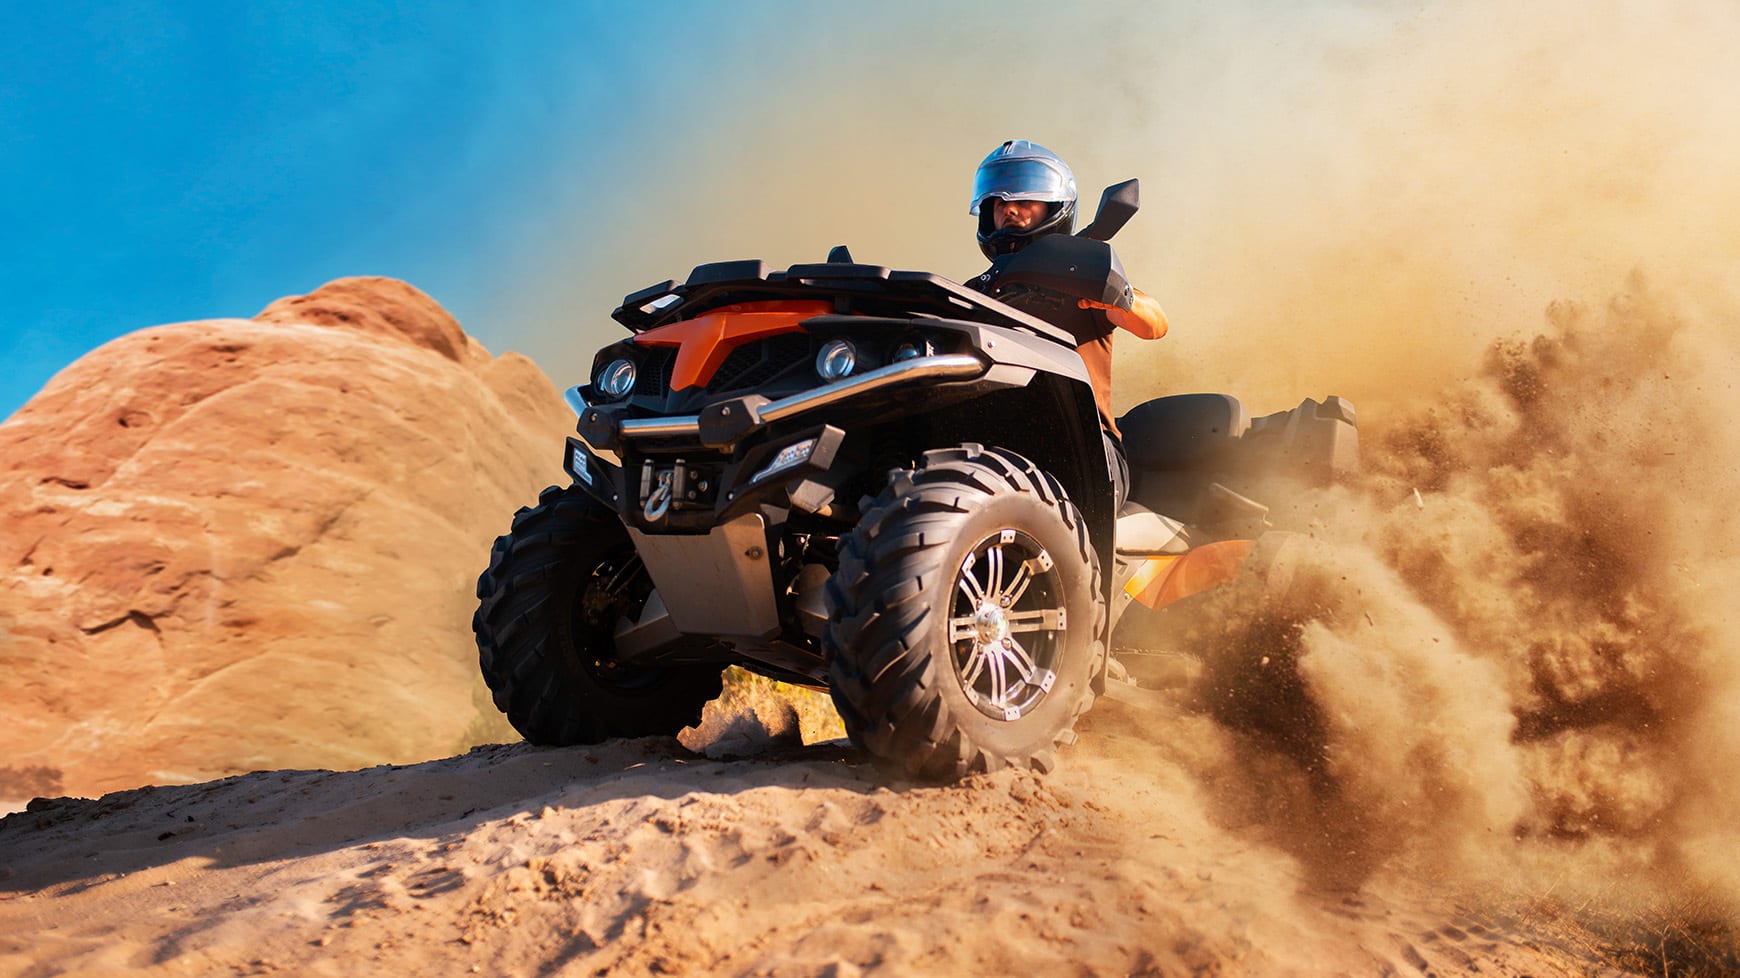 Quad Bike Equipped with Sand Tires Driving Through Sandy Dune Background